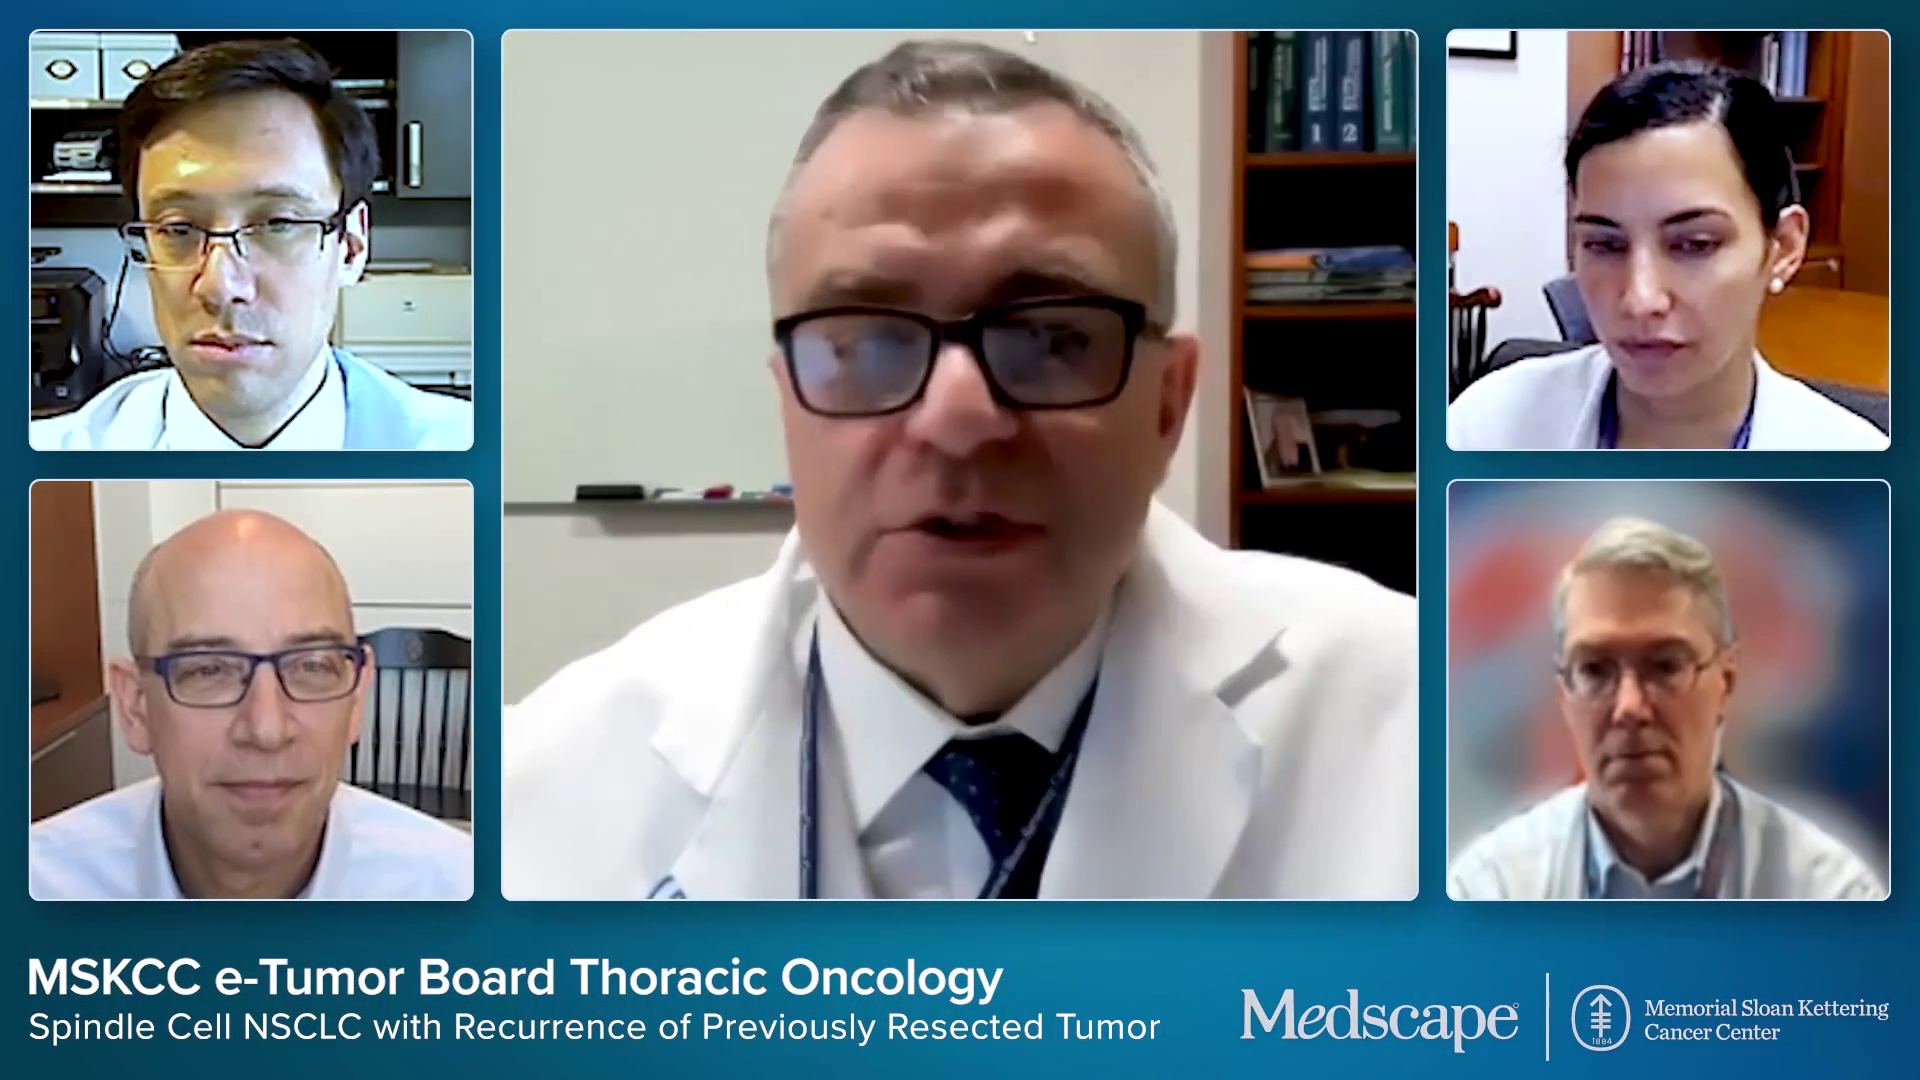 MSK e-Tumor Board: Spindle Cell NSCLC with Recurrence of Previously Resected Tumor